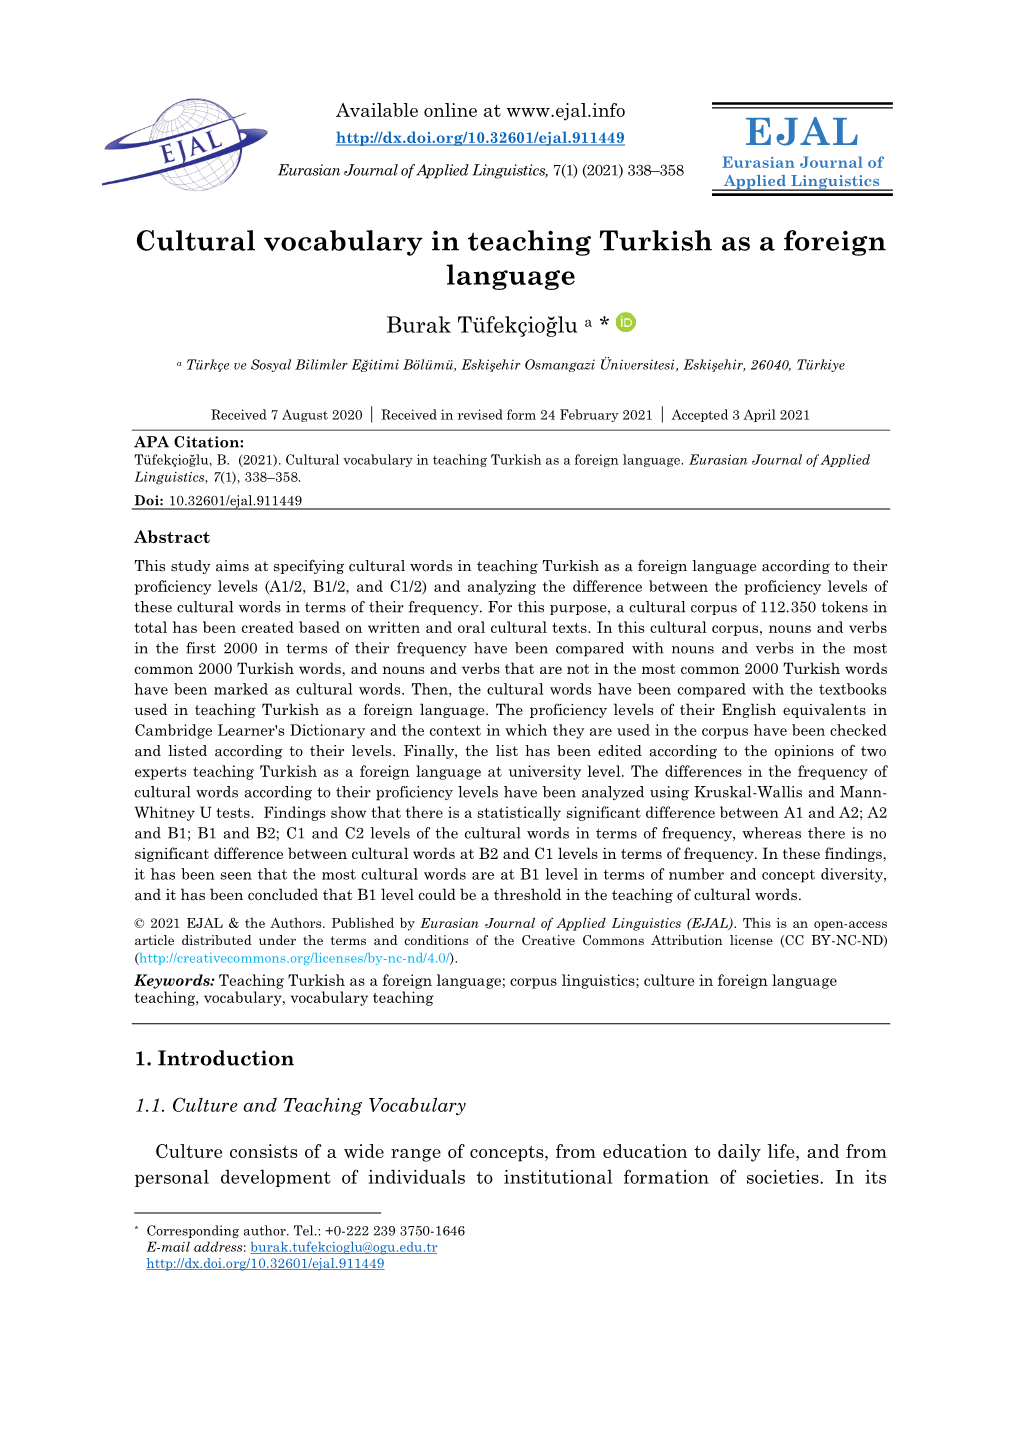 Cultural Vocabulary in Teaching Turkish As a Foreign Language